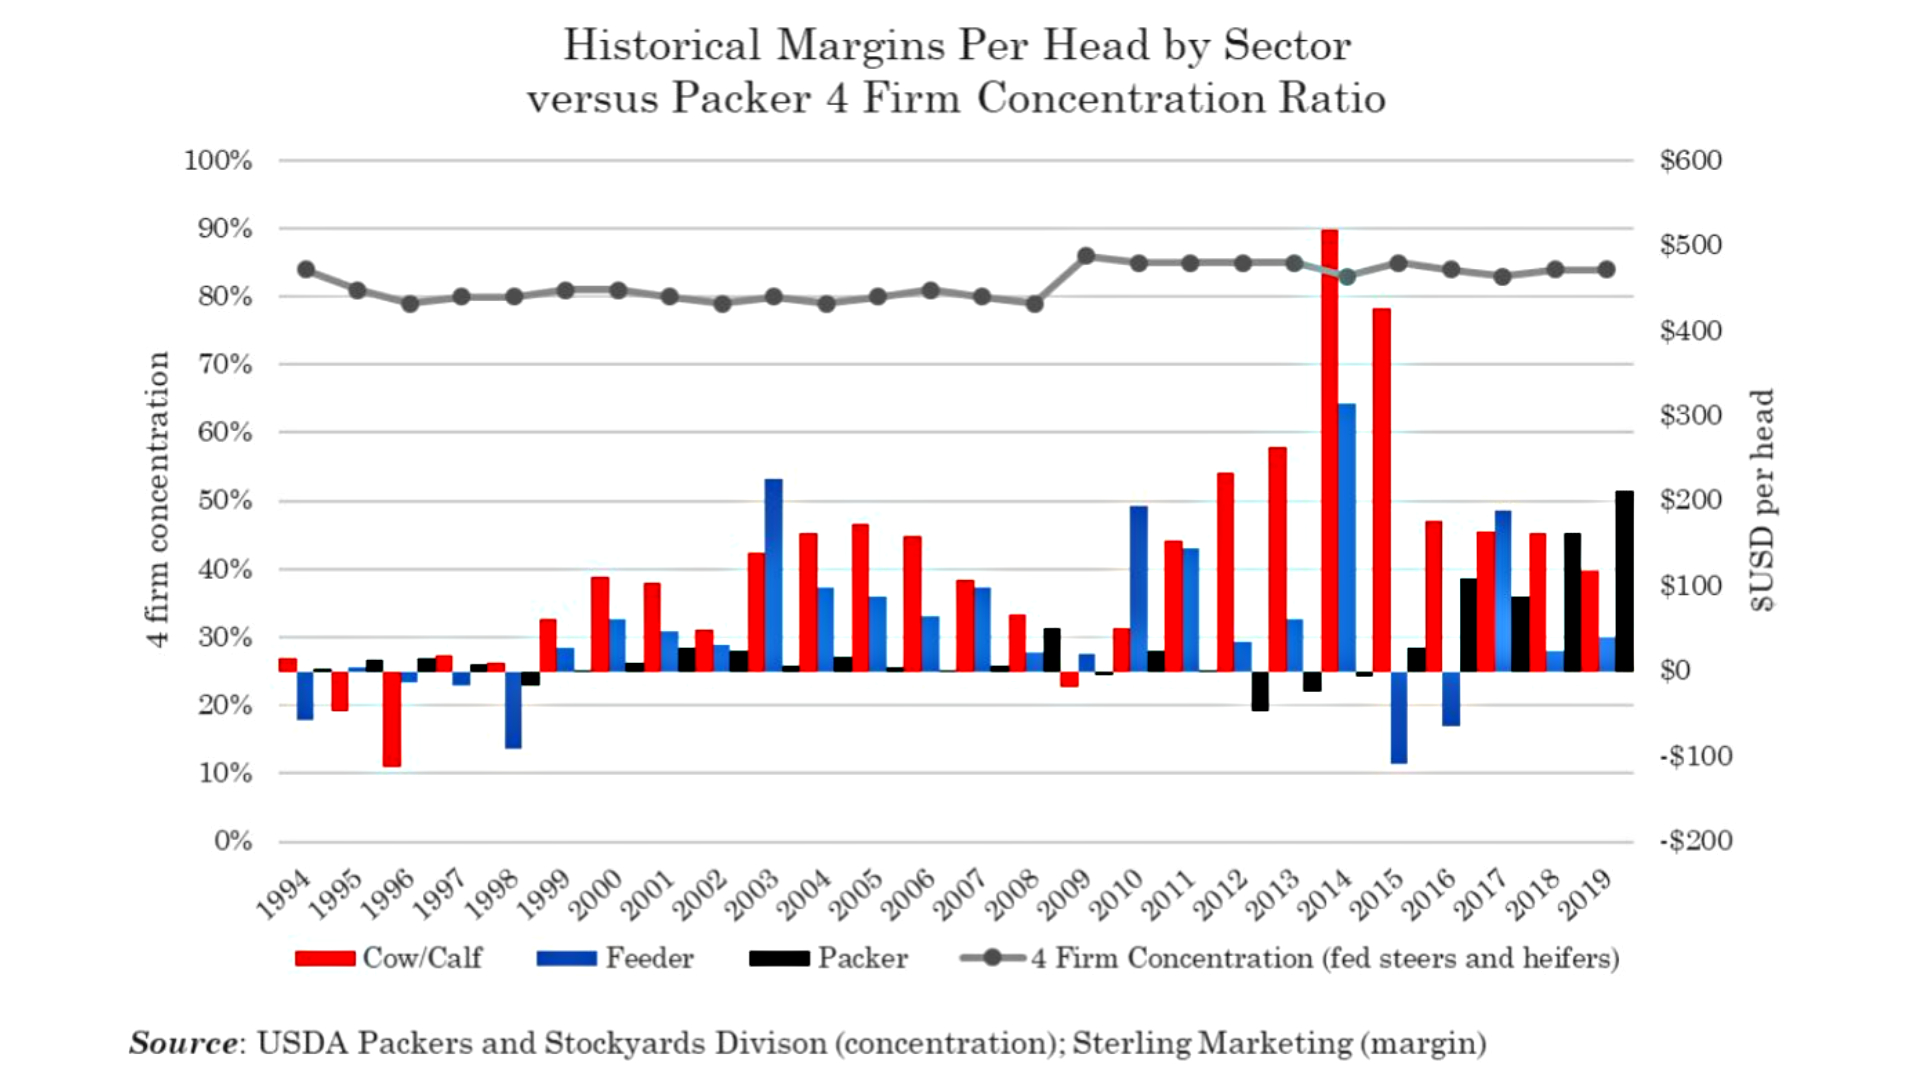 A chart of historical margins per head by sector versus packer 4 concentration ratio